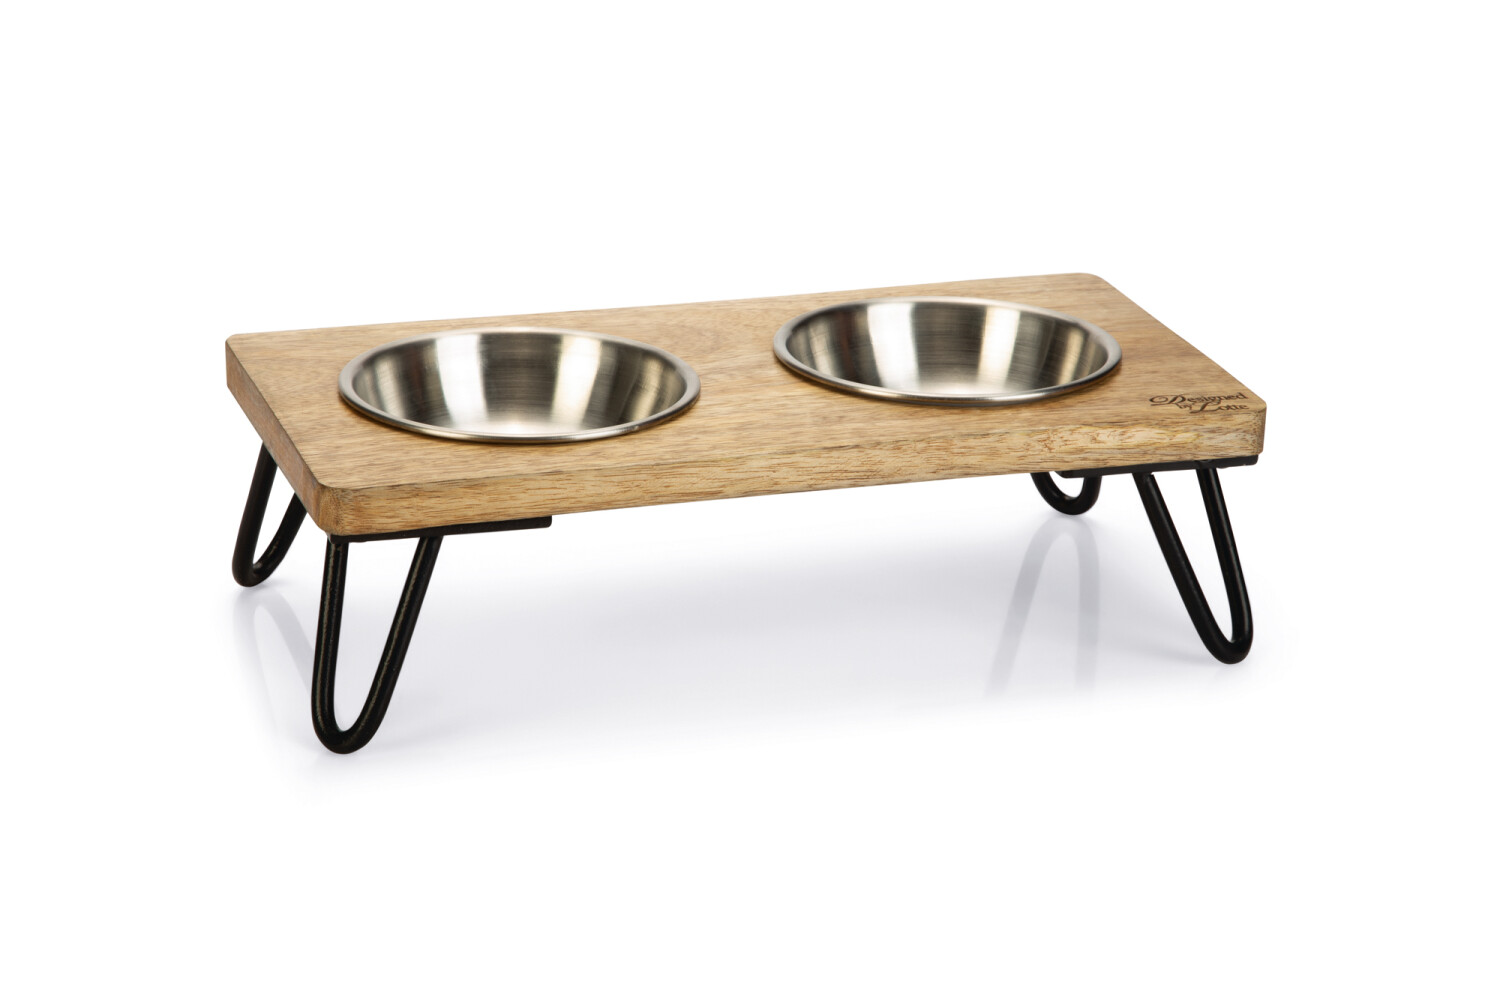 designed by lotte dinerset linga - kat - hout/metaal - incl. 2 bakjes - 31x16x10